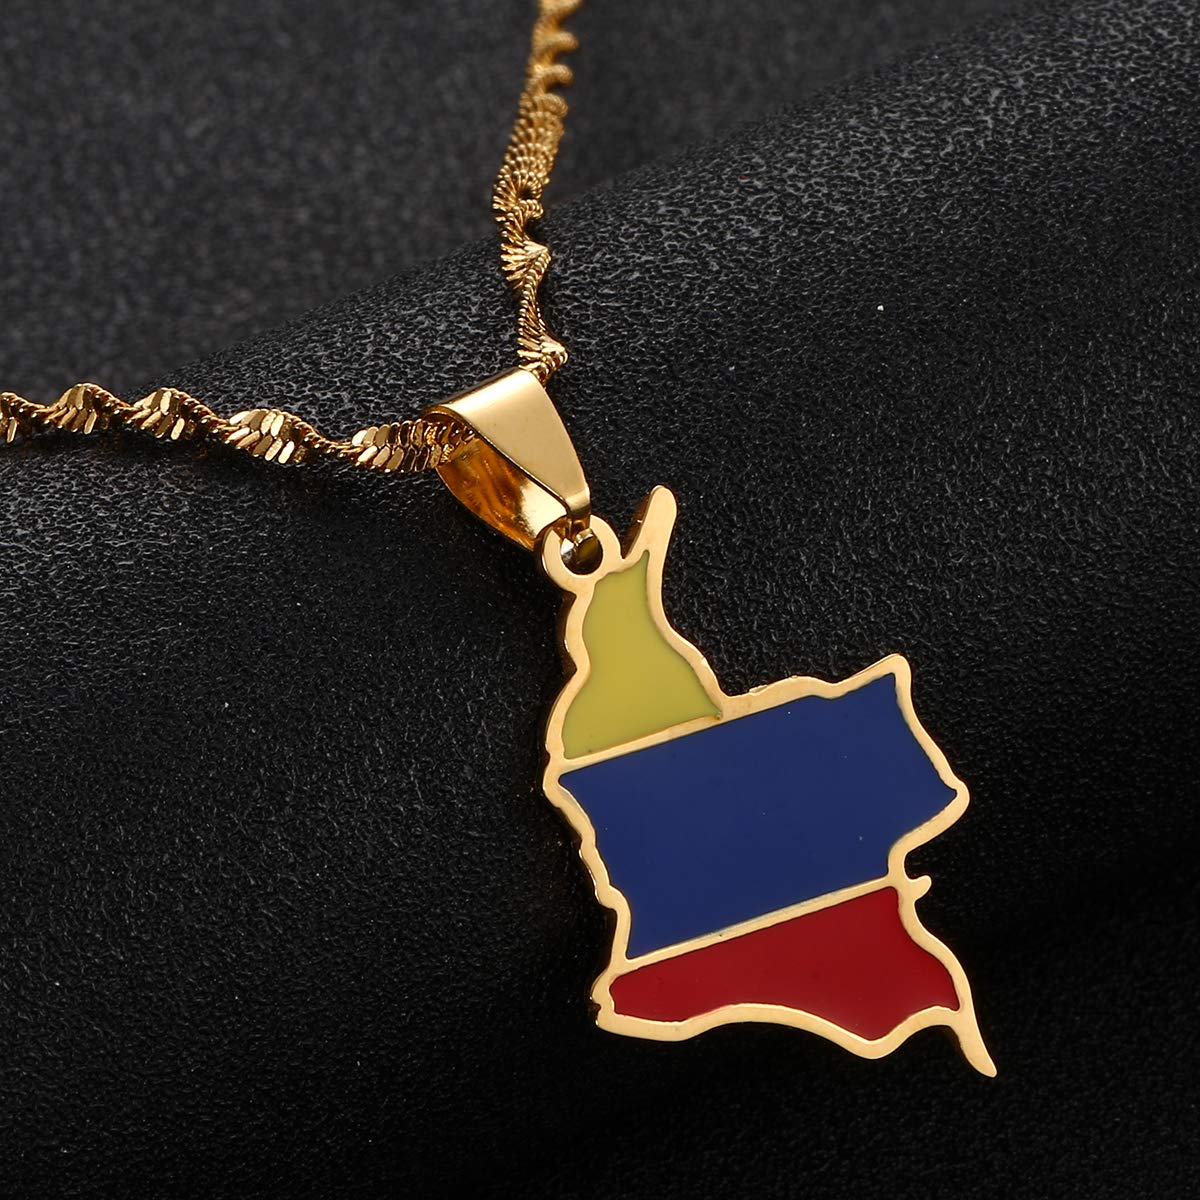 Huangshanshan Enamel Colombia Map Pendant Necklace Colombian Flag Map Jewelry (Gold)